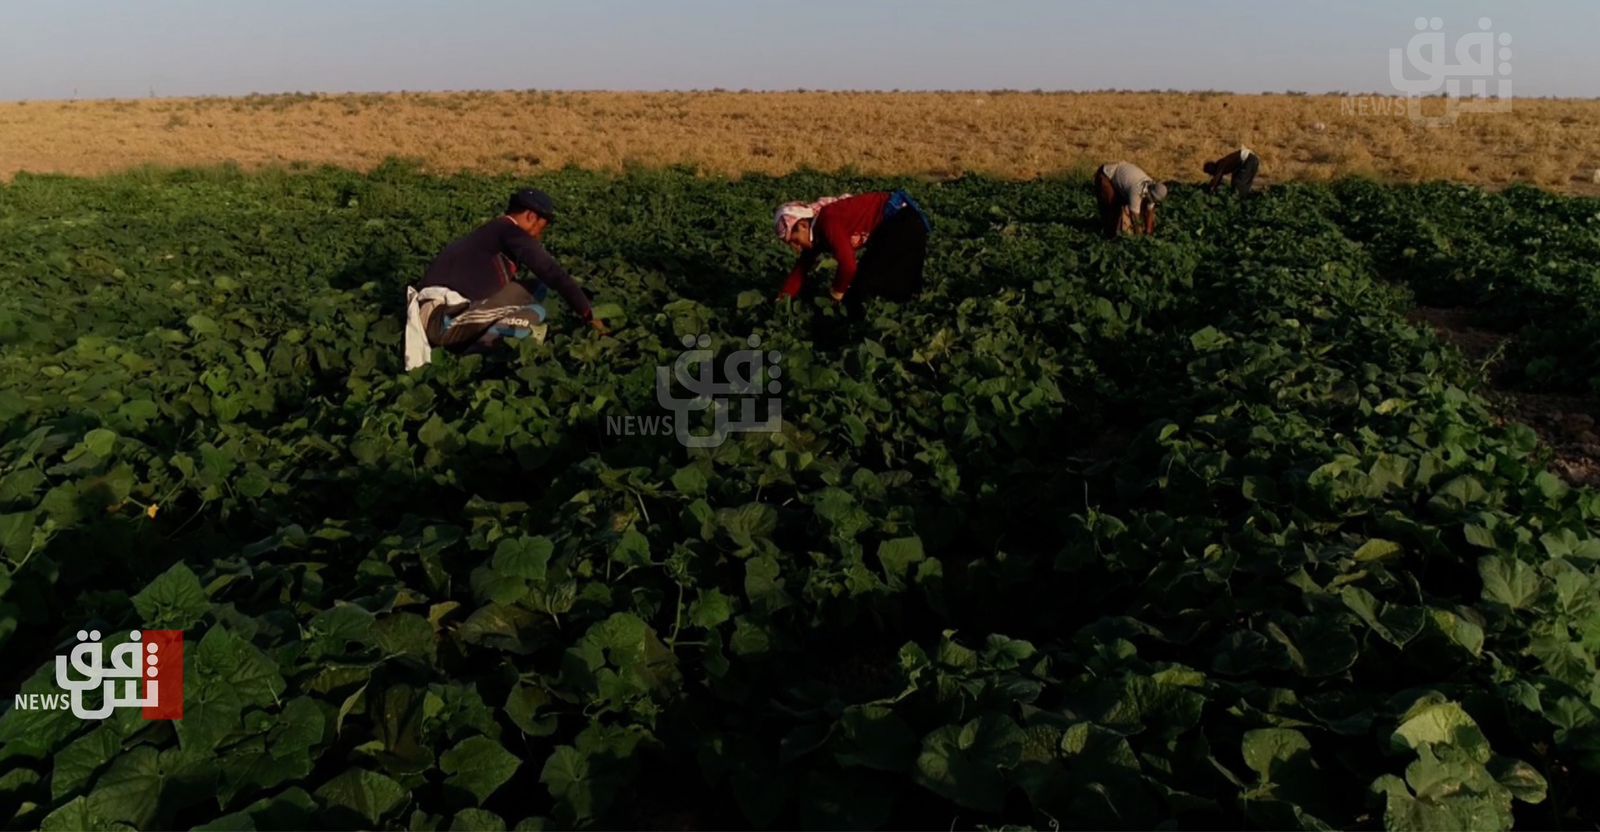 Kurdish IDP farmers face uncertainty as camps prepare to close